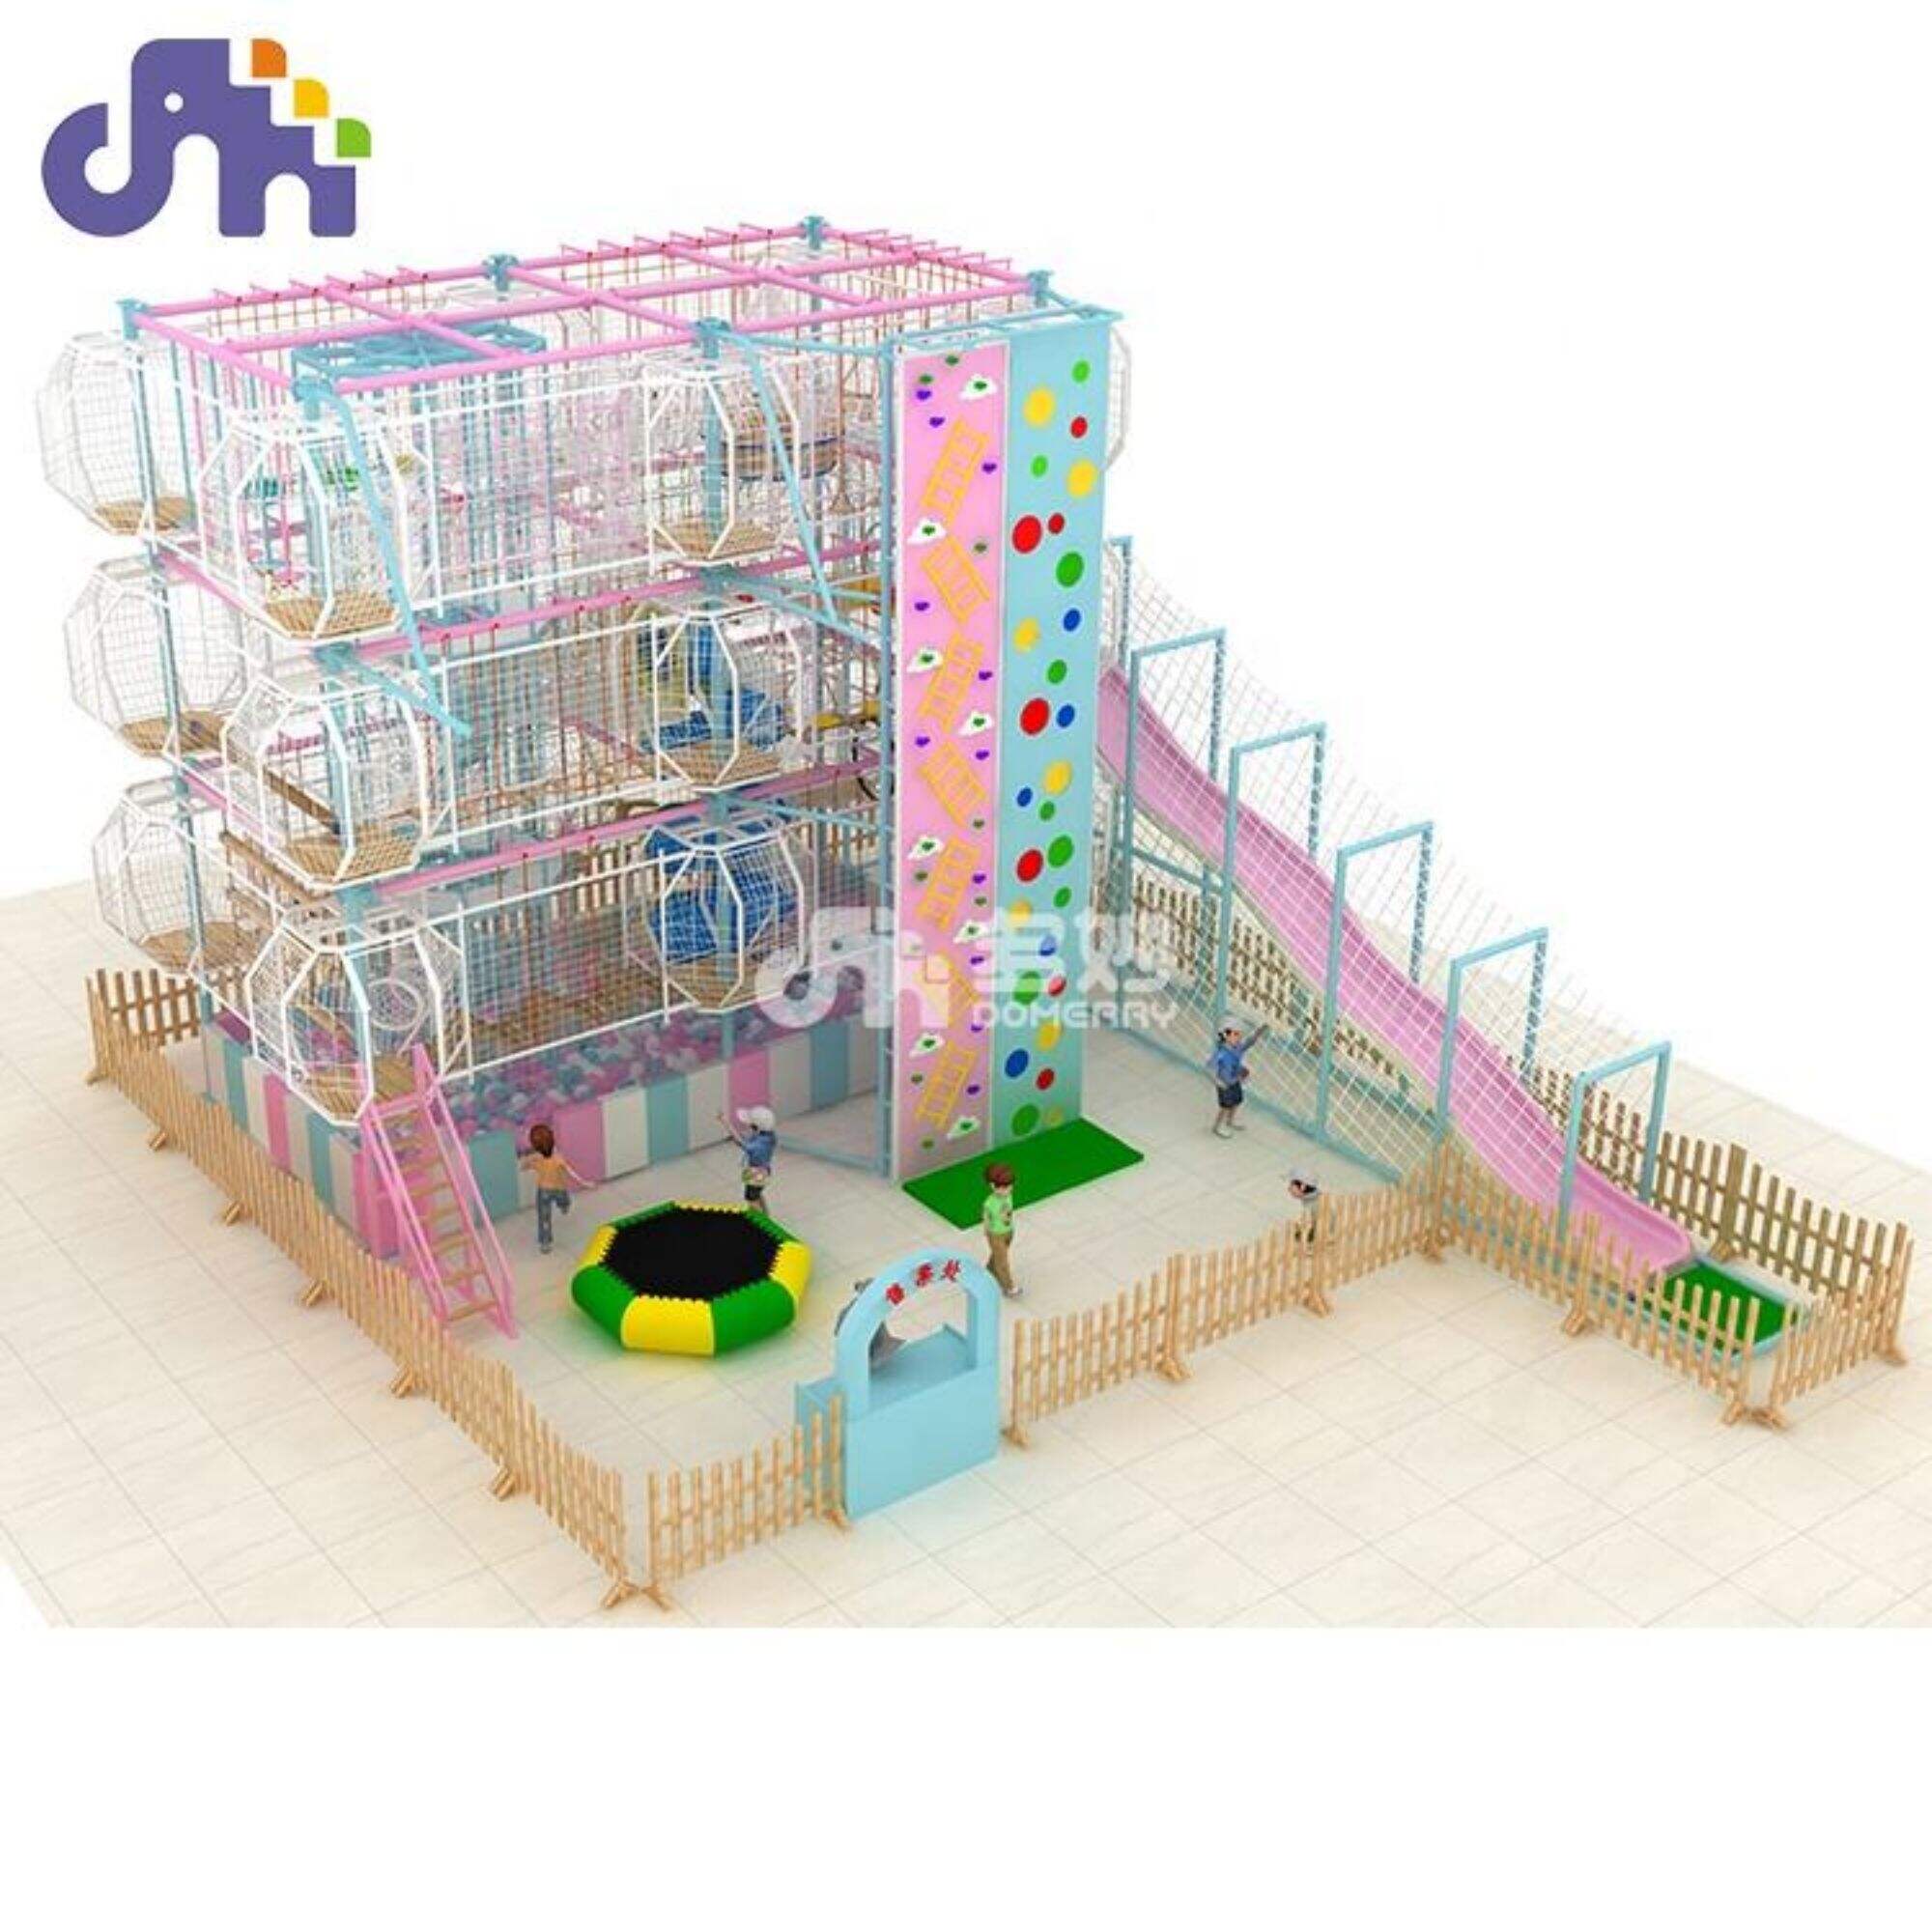 High rope course indoor outdoor play center adventure climbing net playground for kids and adult